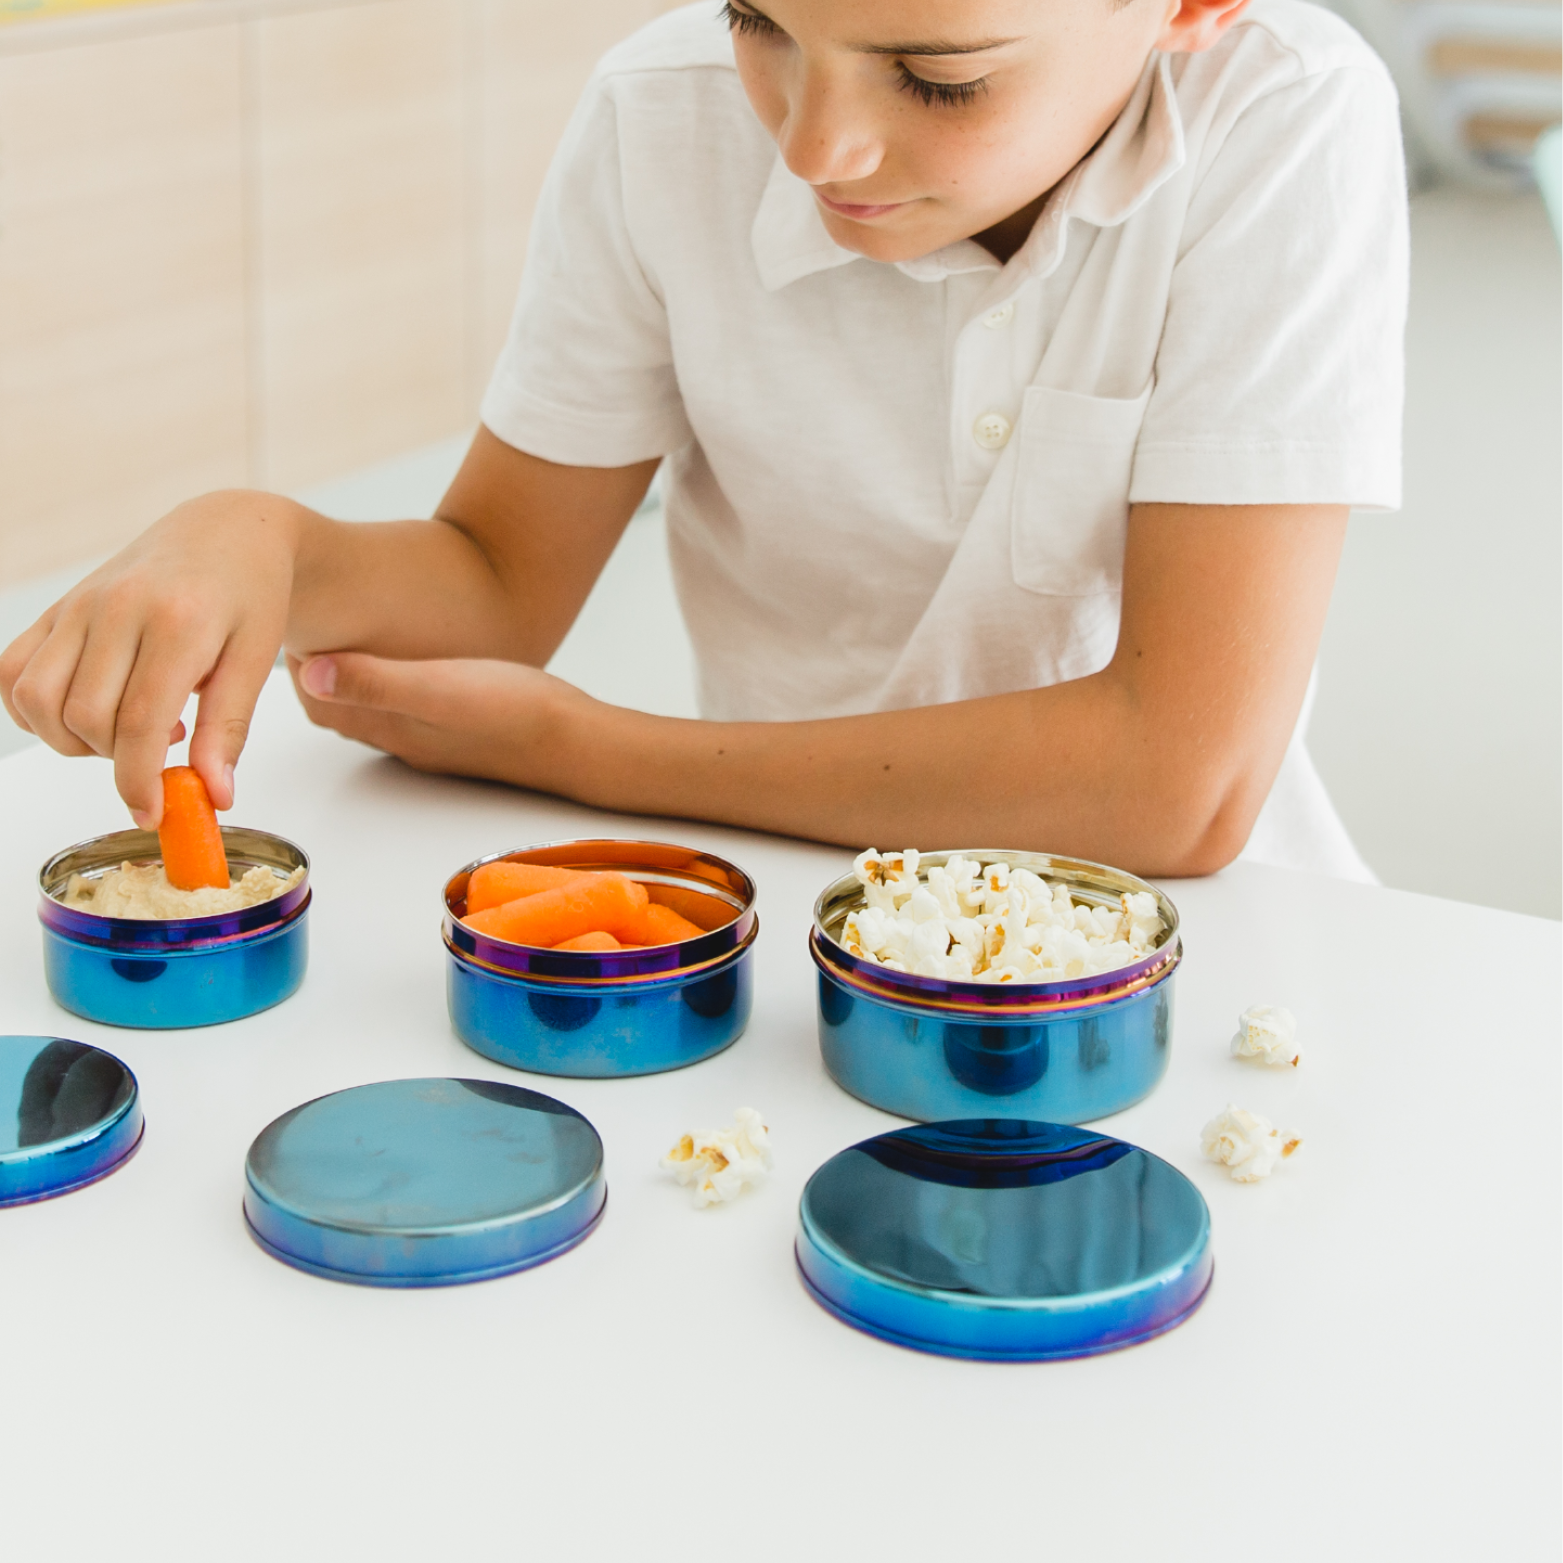 Doctor-designed colorful containers made with 100% recycled steel and without harmful plastic chemicals. Designed to nest, stack and store so you can move your meal with you — wherever you dine. 